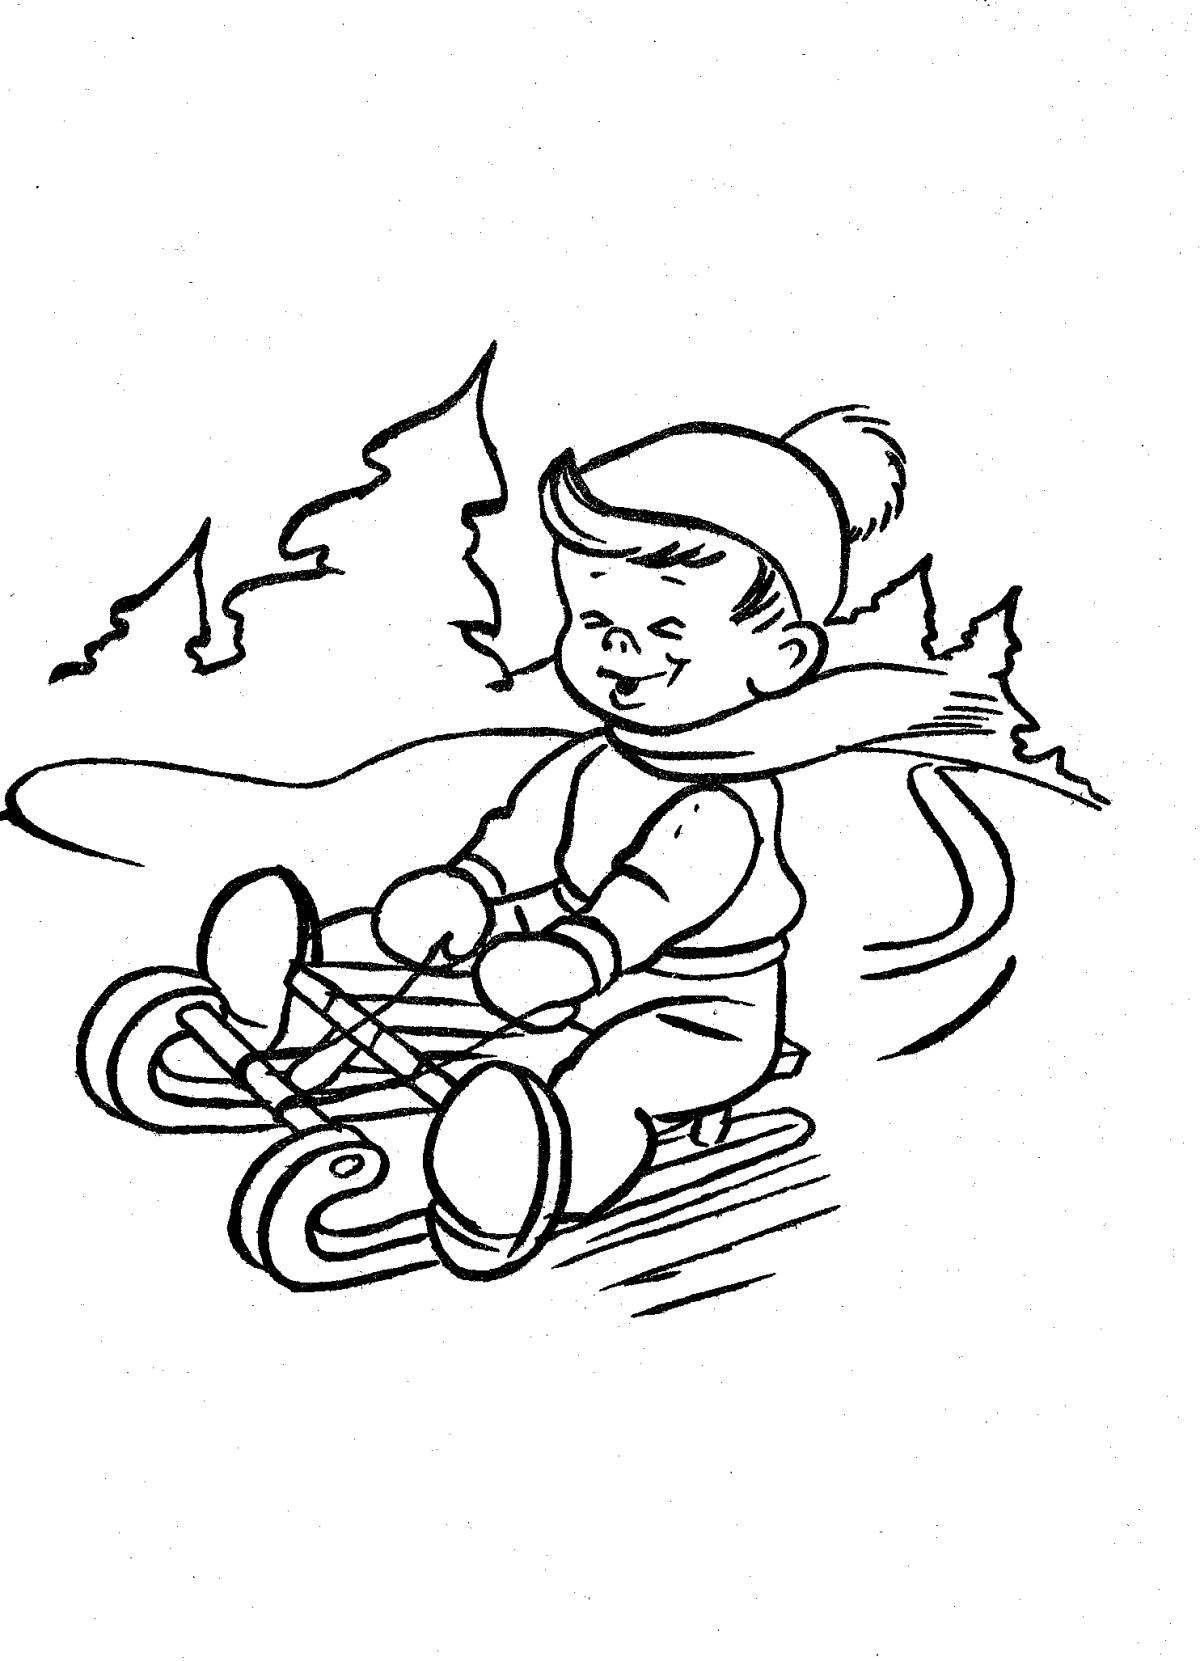 Coloring page playful boy on a sled